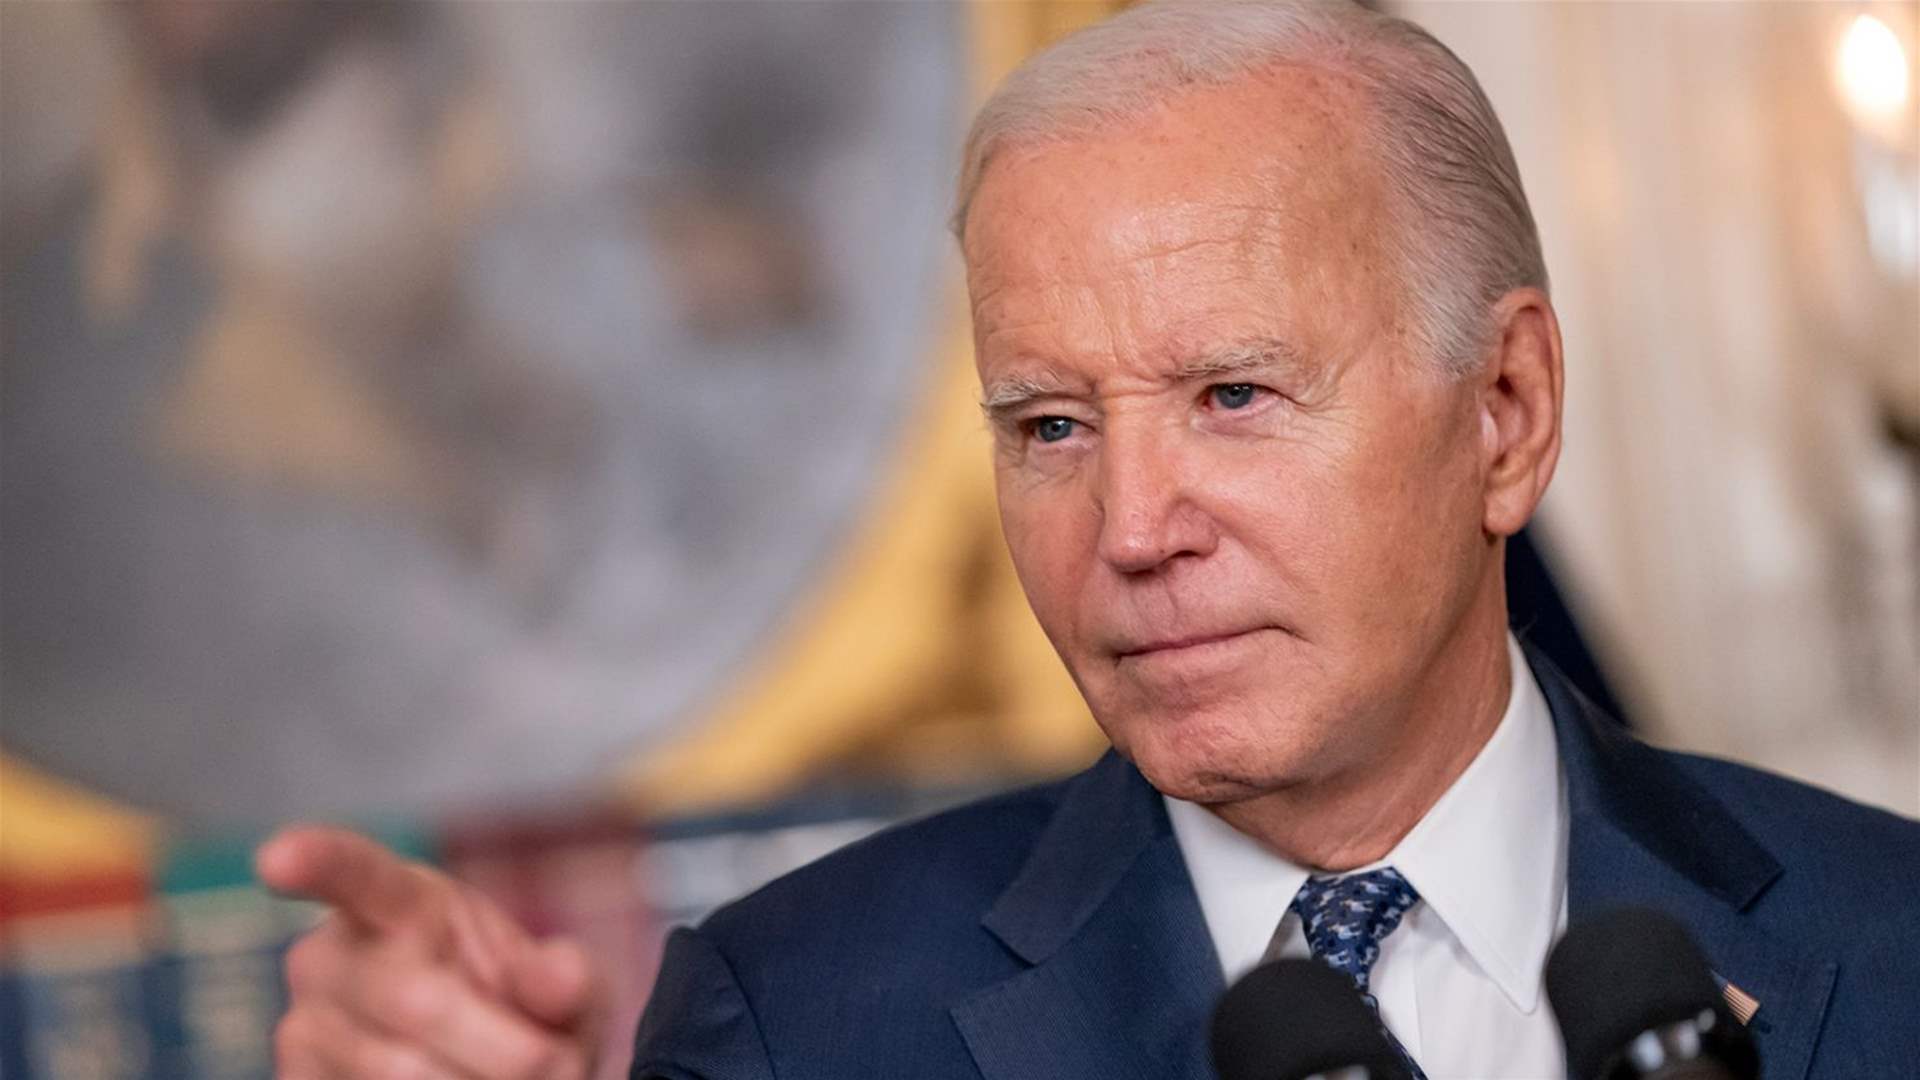 Biden&#39;s &#39;old age&#39; blunders: A series of embarrassing missteps